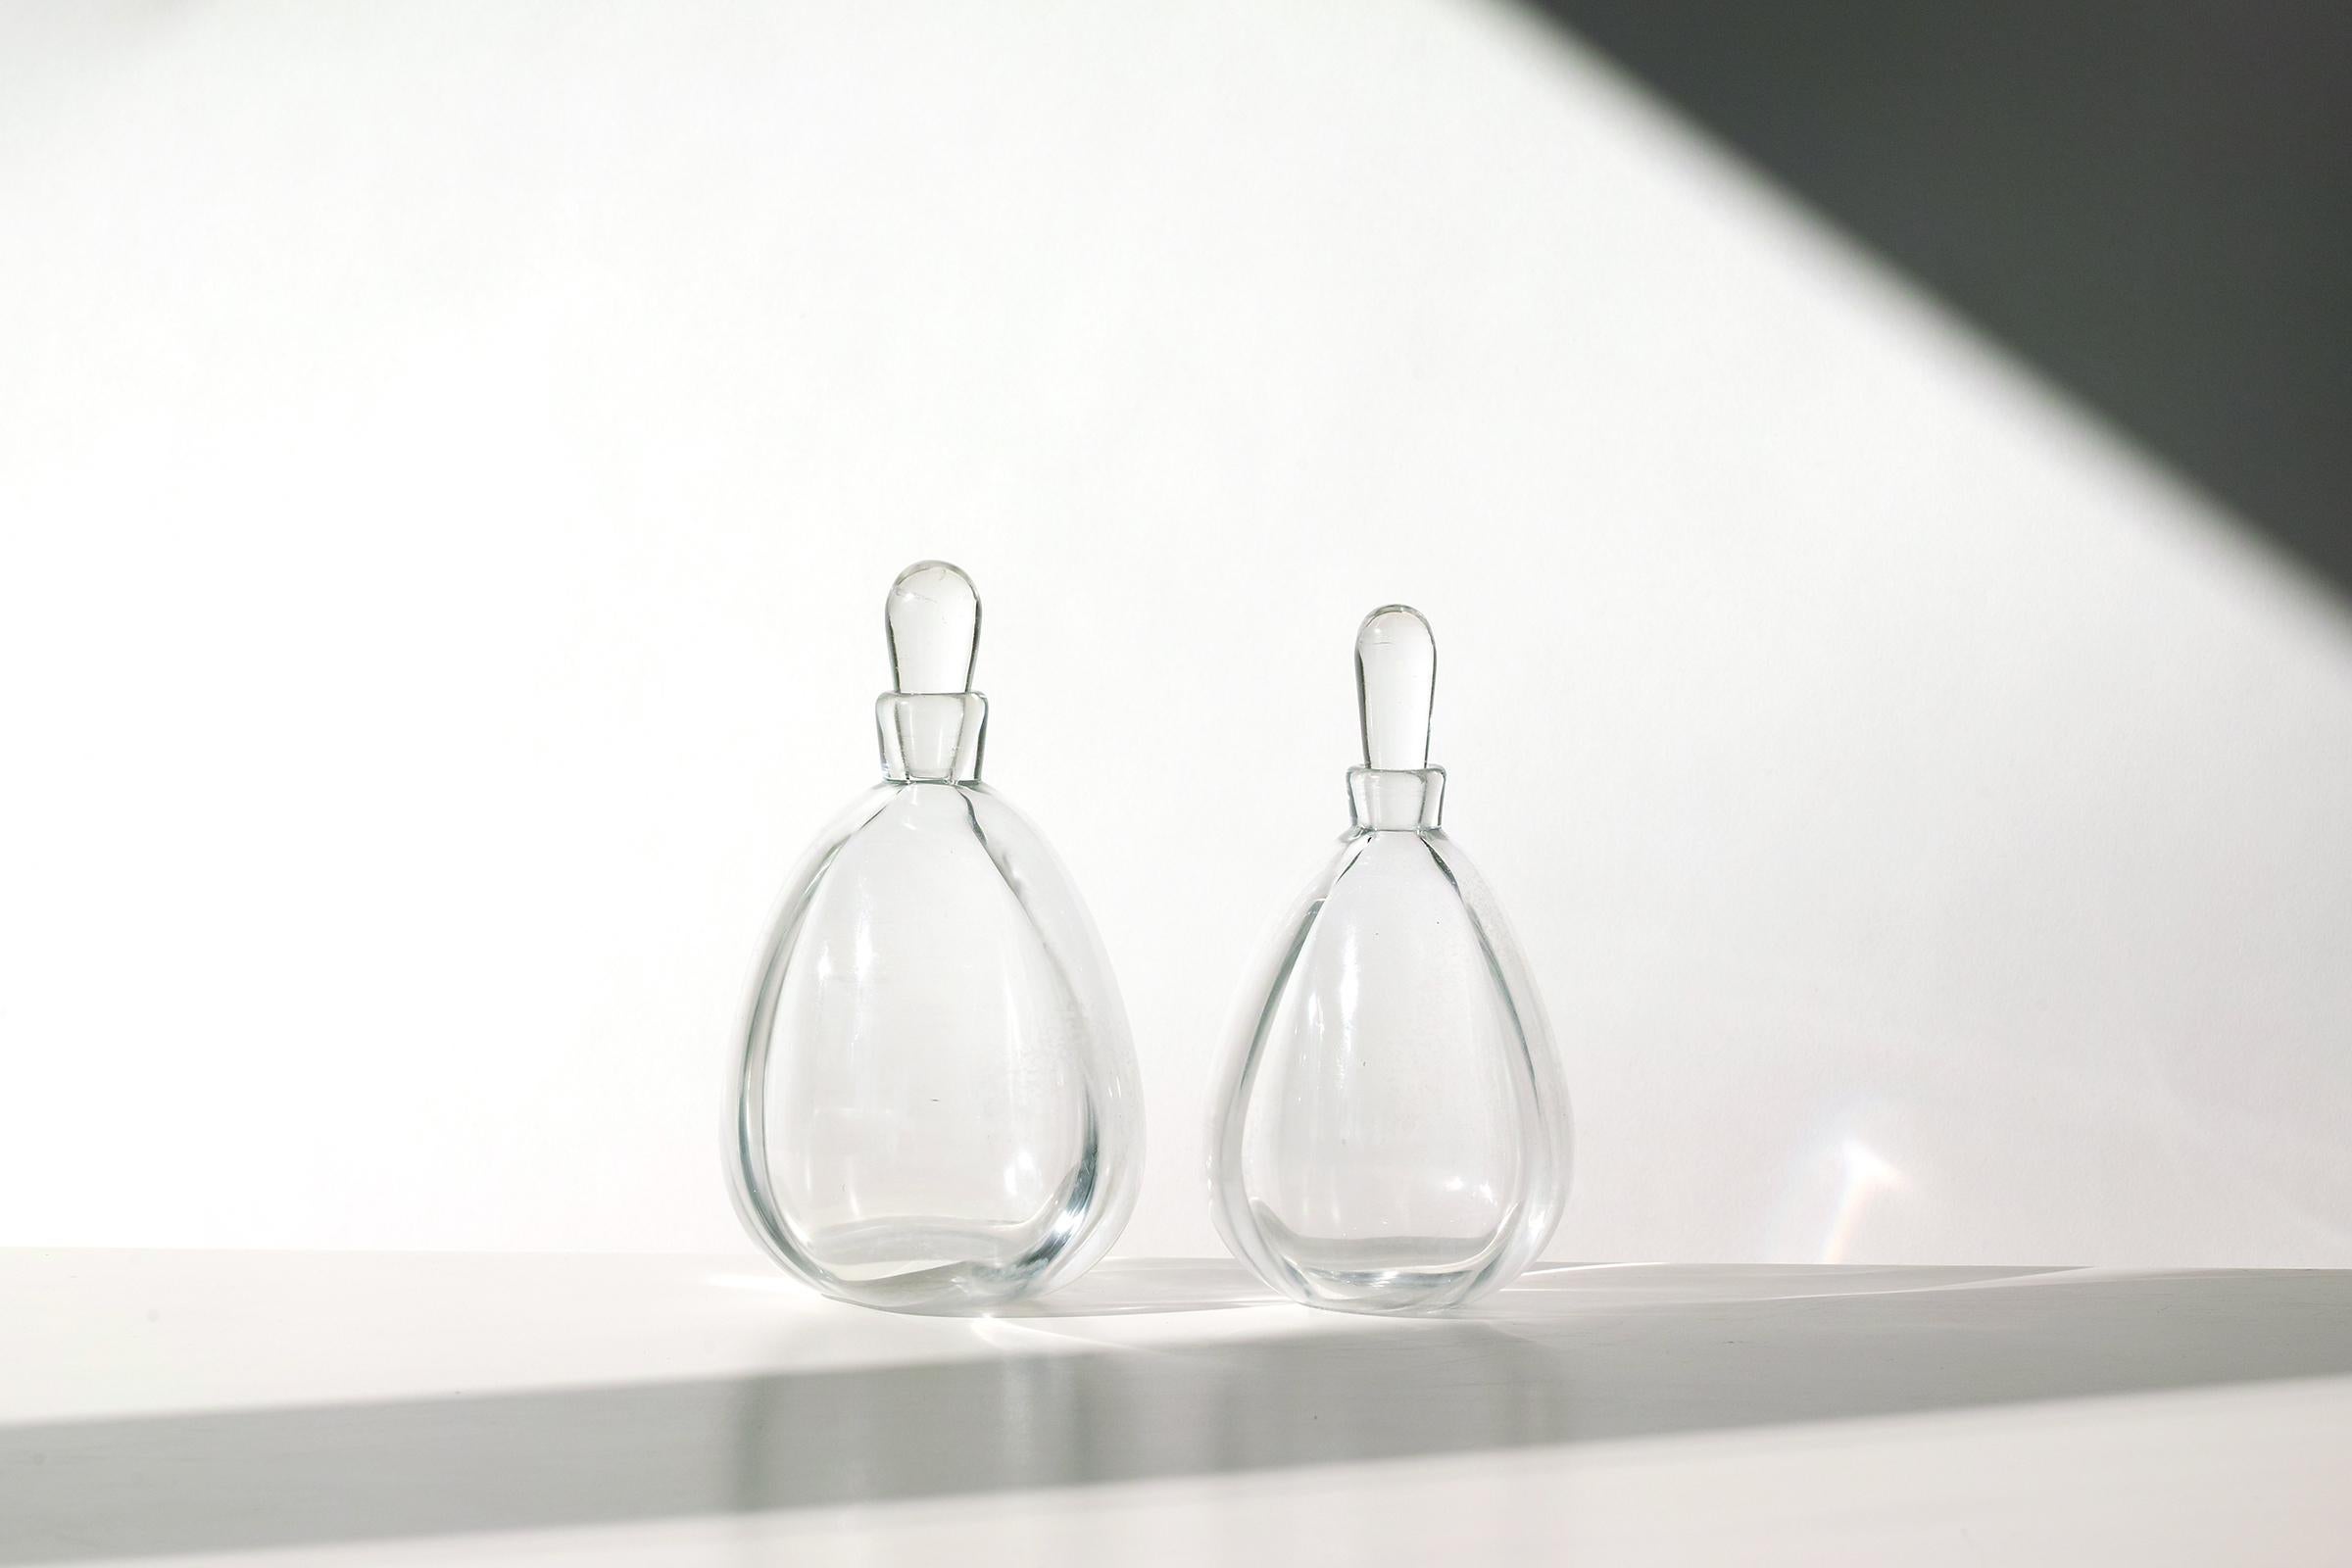 Handmade Swedish Art Glass Bottles by Vicke Lindstrand In Good Condition For Sale In Brooklyn, NY